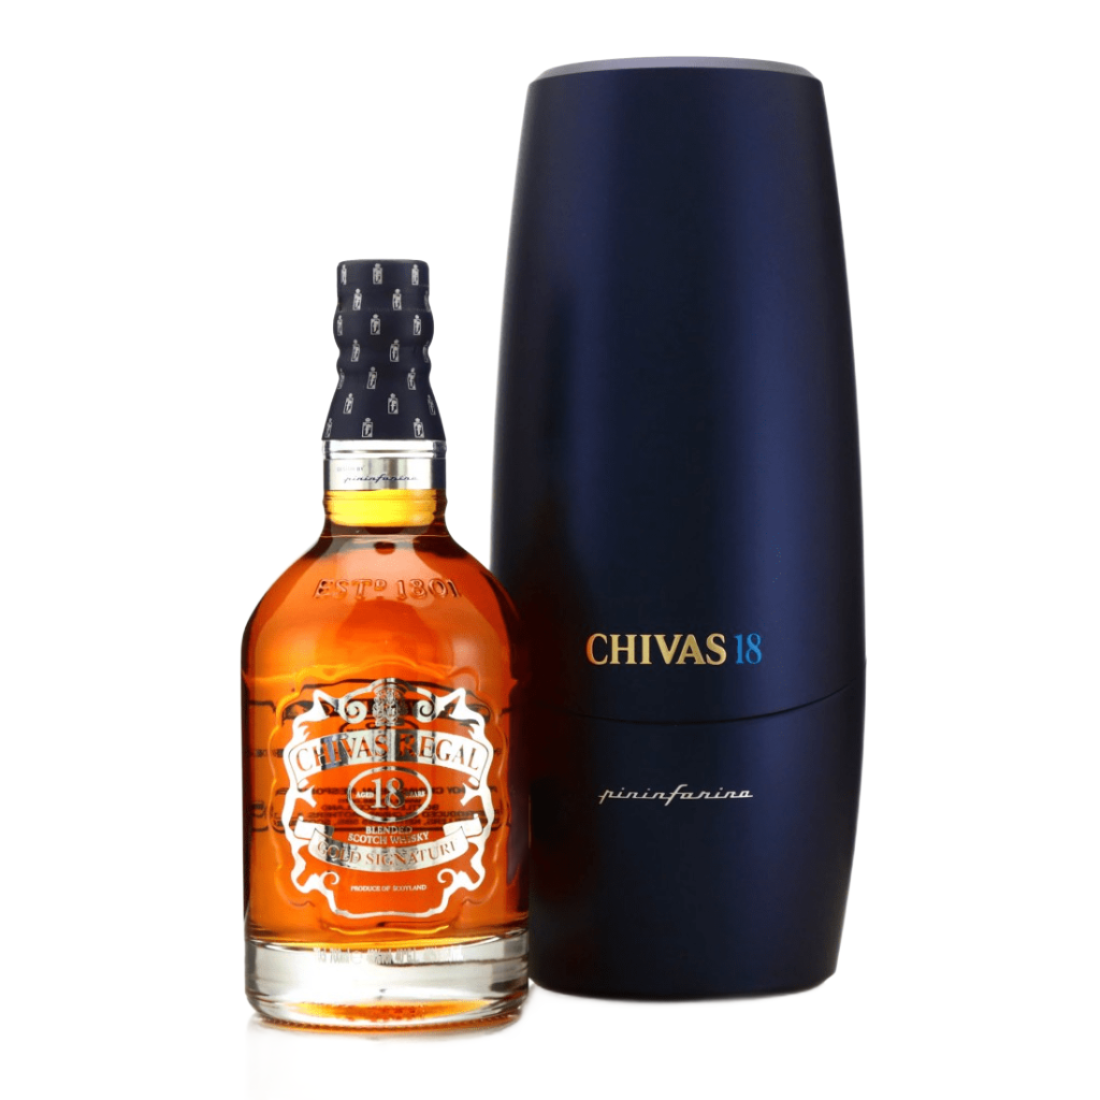 A CHIVAS 18 years by PININFARINA 'Gift Pack' 70cL includ…